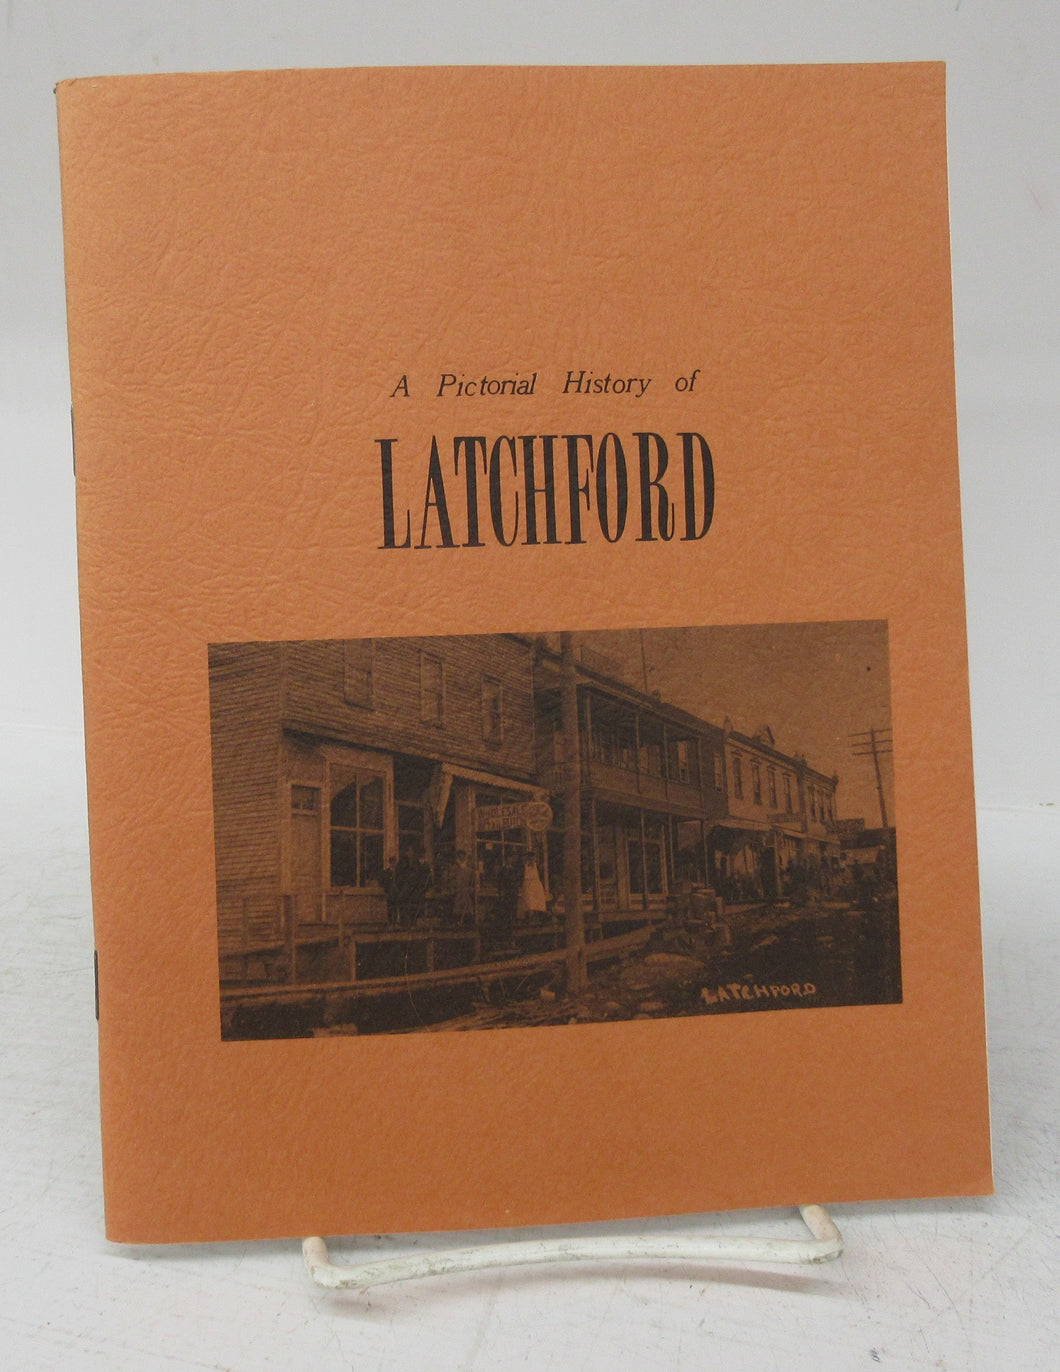 A Pictorial History of Latchford